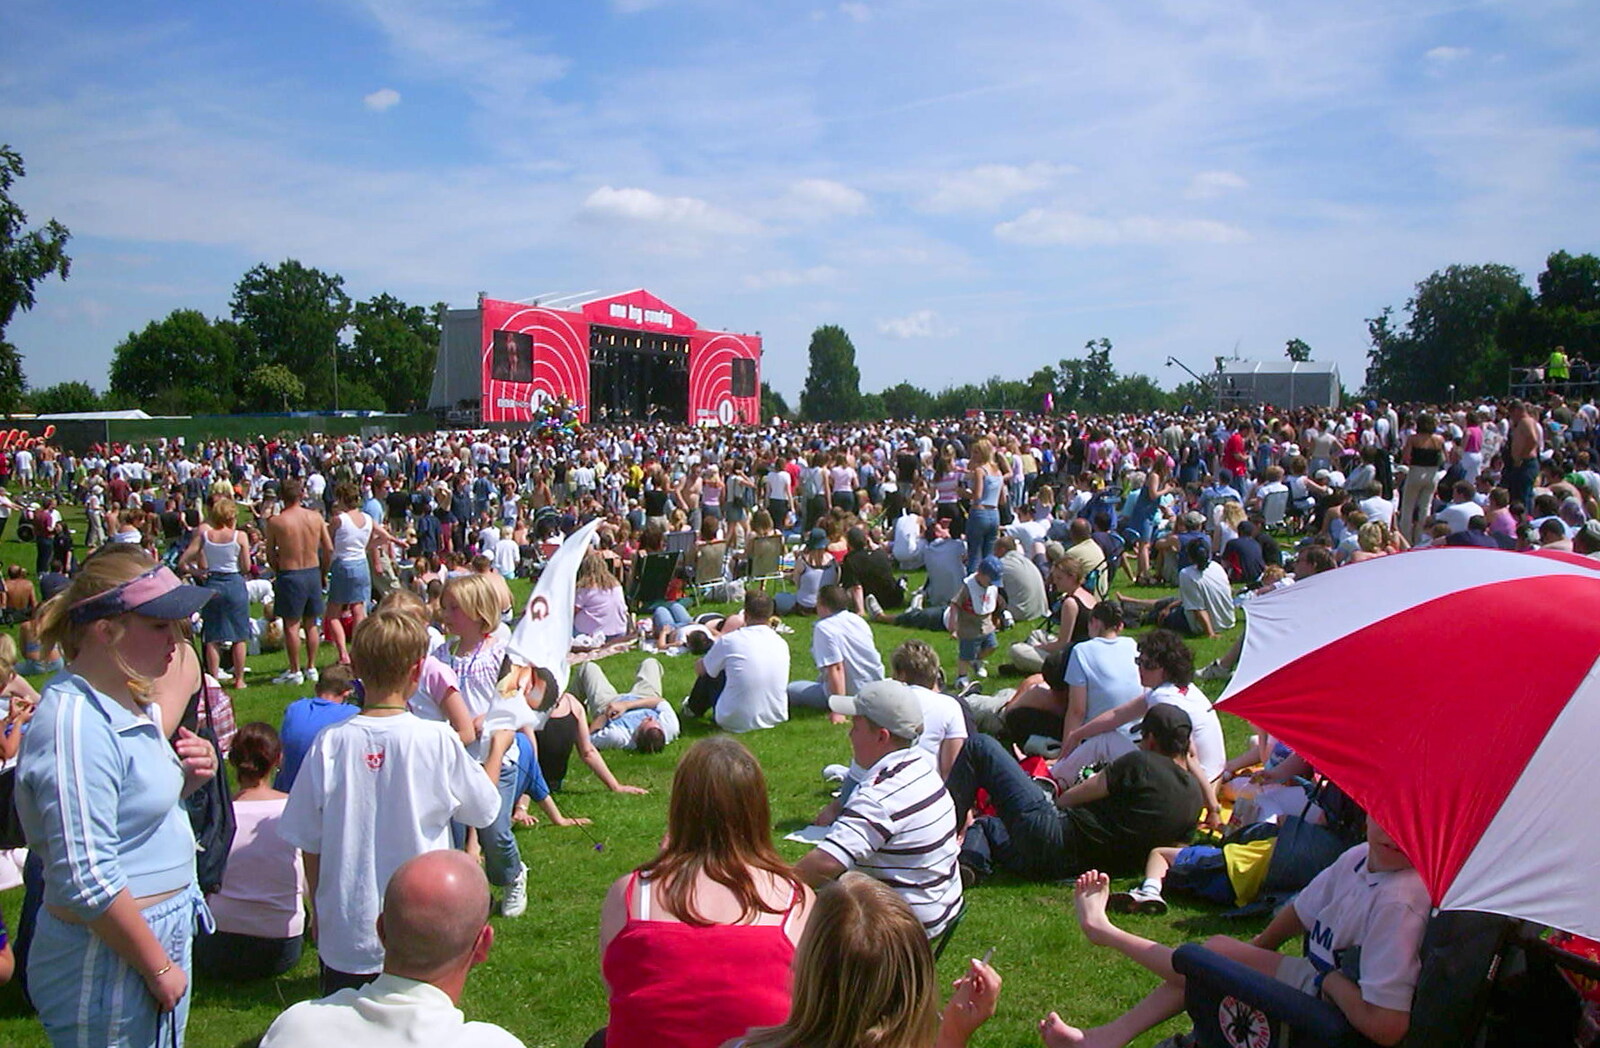 The One Big Sunday stage from Radio 1's One Big Sunday, Chantry Park, Ipswich - 14th July 2002